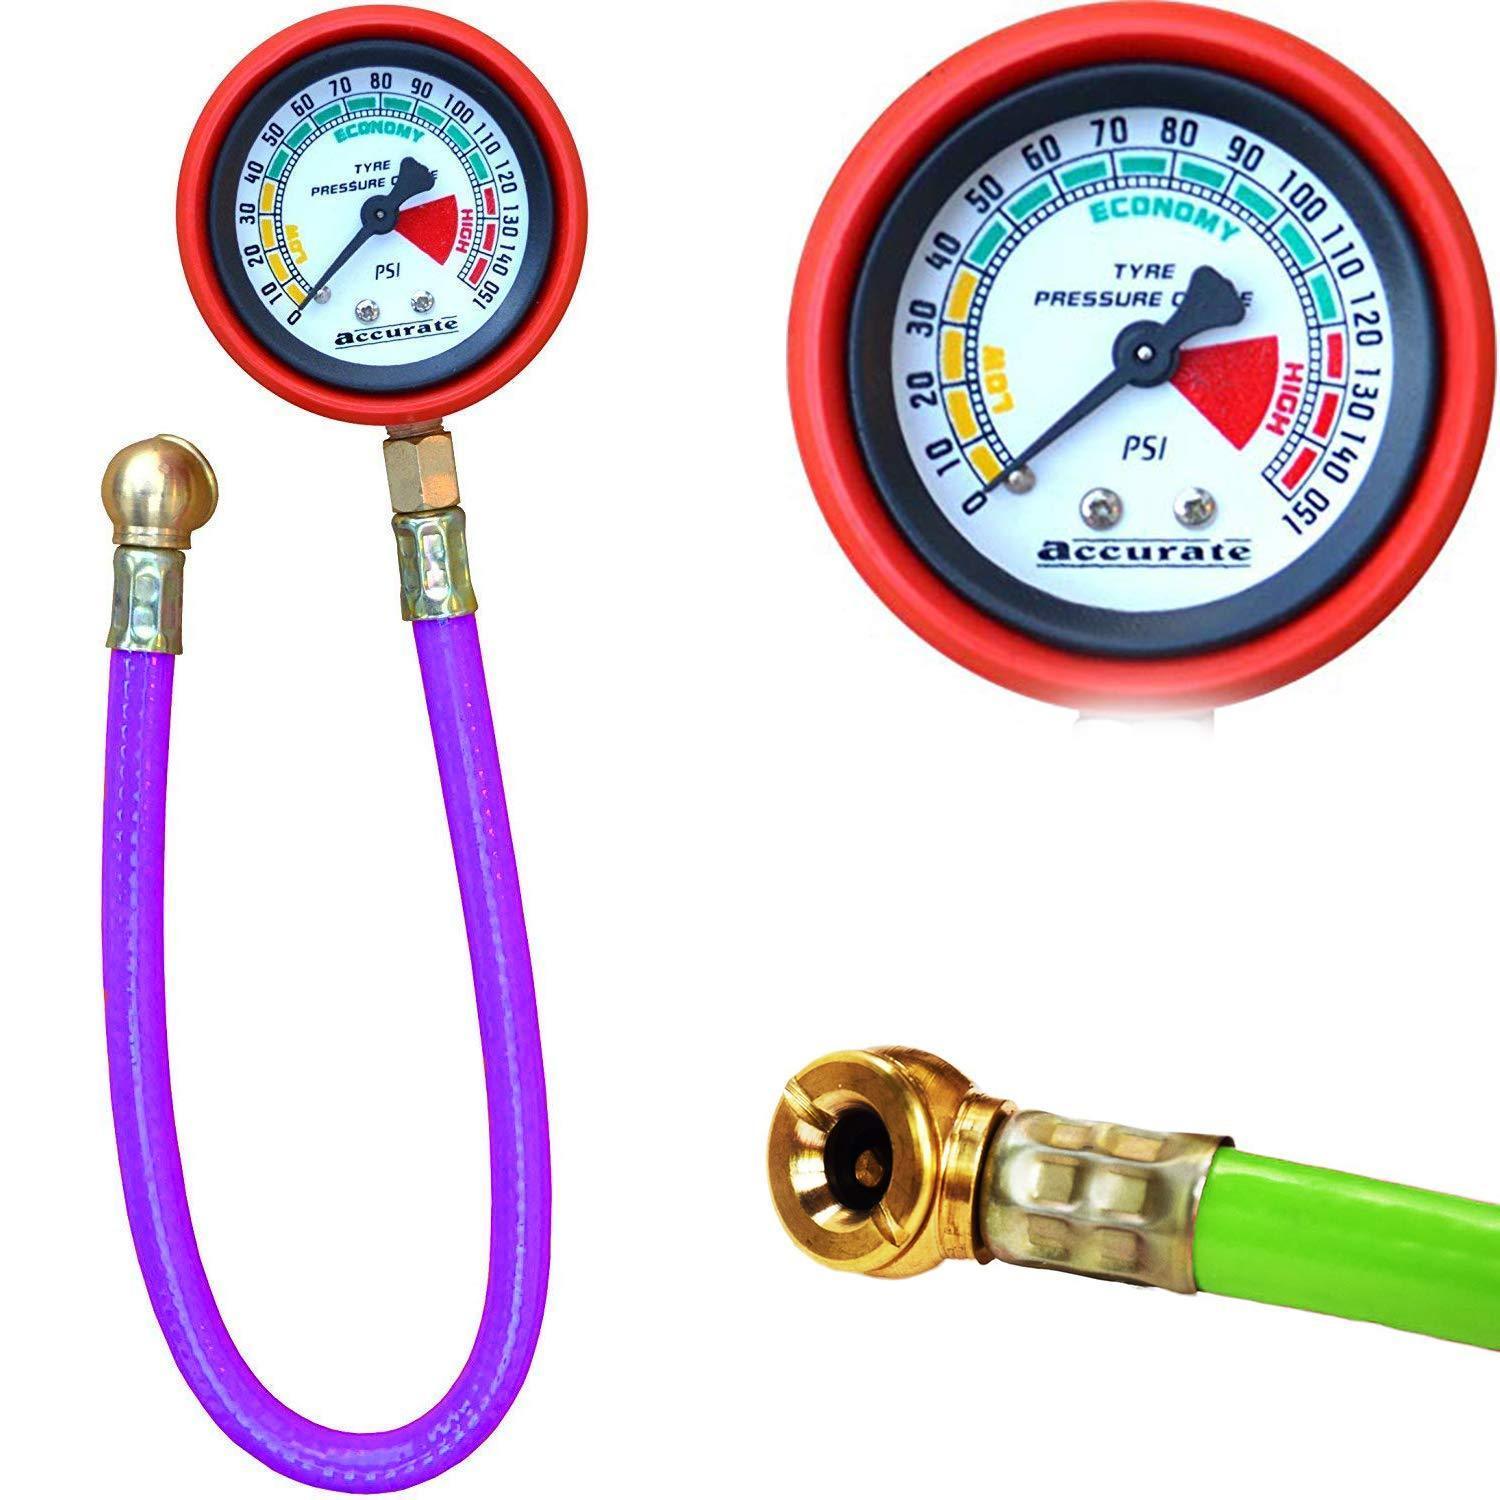 0512 Heavy Duty Tire Inflator Gauge Air Compressor Accessories - SkyShopy